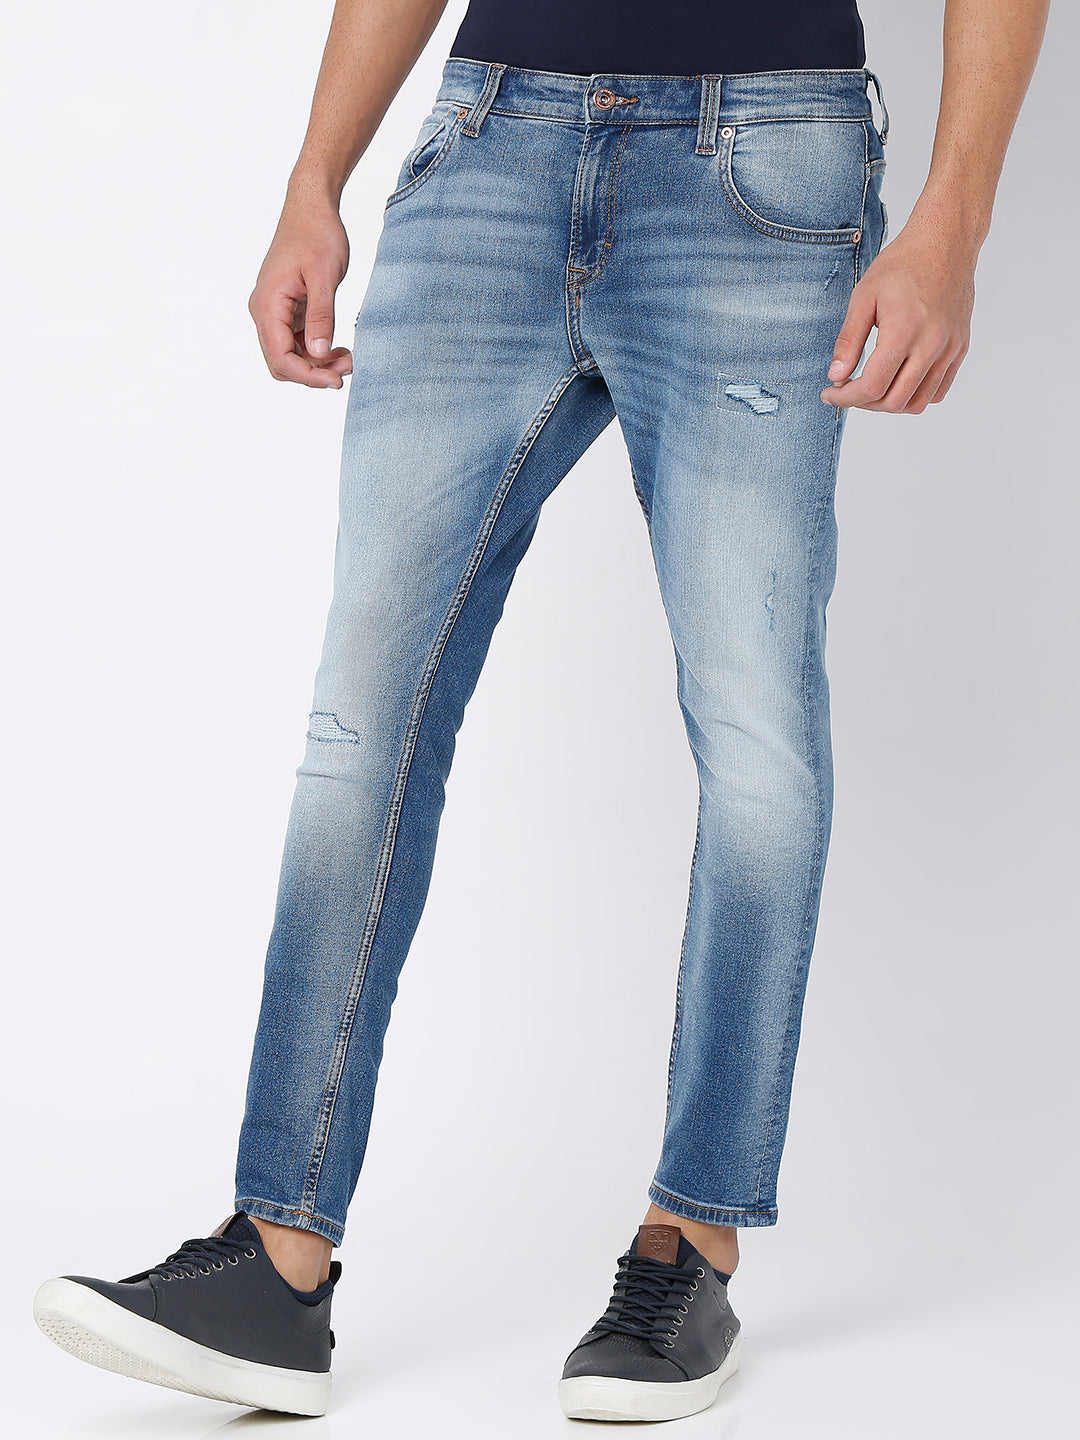 Buy Spykar Jeans Online in India at Low Cost on Myntra